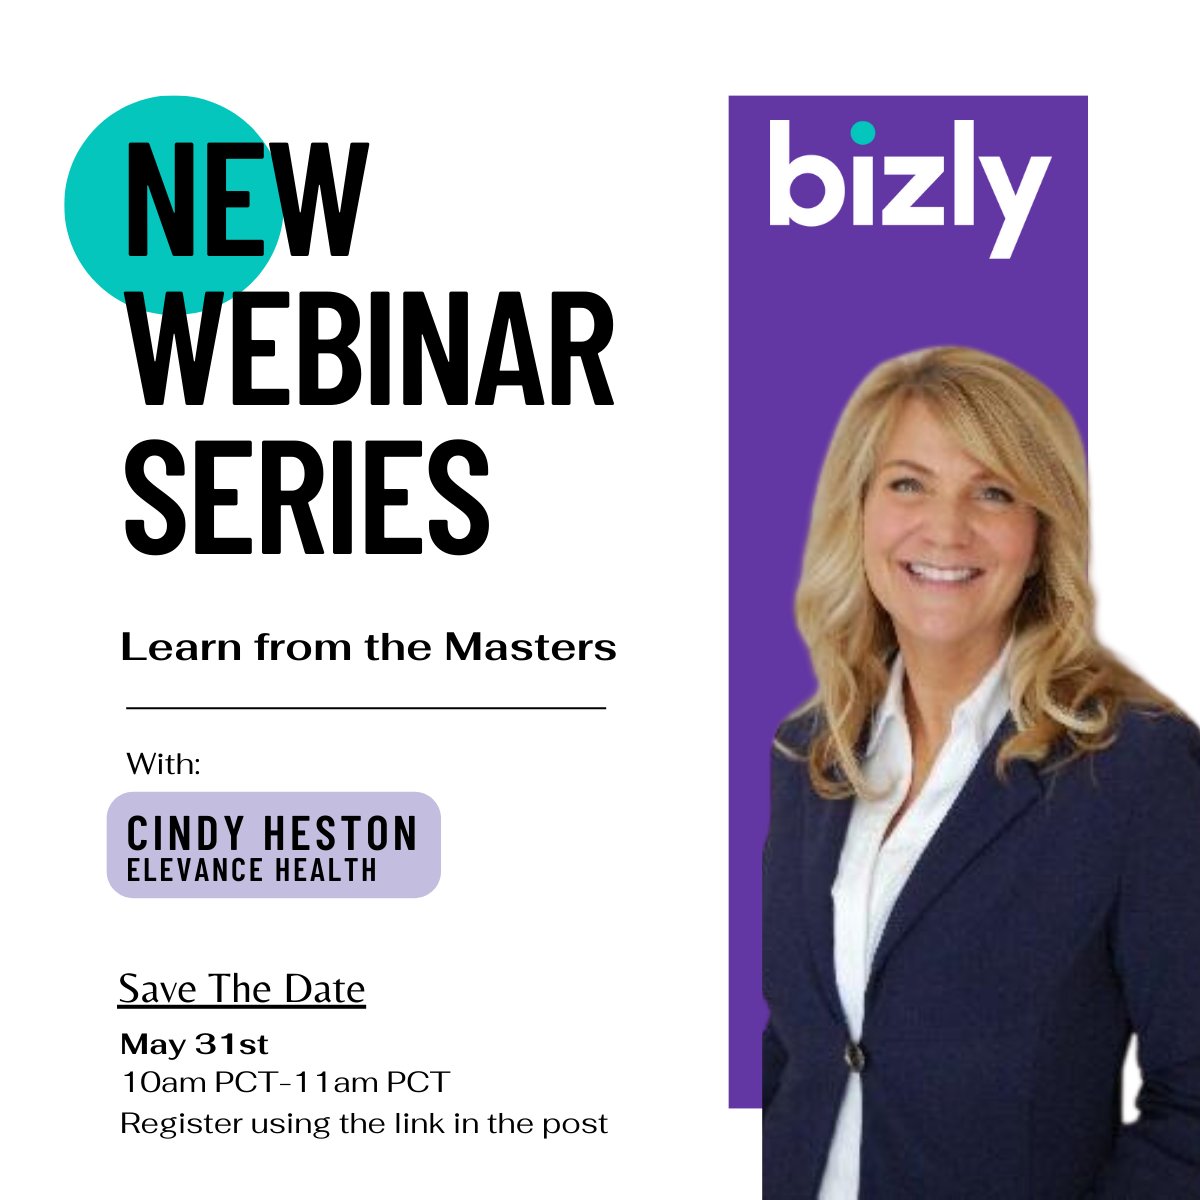 We are excited about our new “Learn from the Masters” webcast series launching May 31st. First one will be w/ Cindy Heston, Director Travel and Meetings from Elevance Health. Register here bit.ly/3VYVxiU